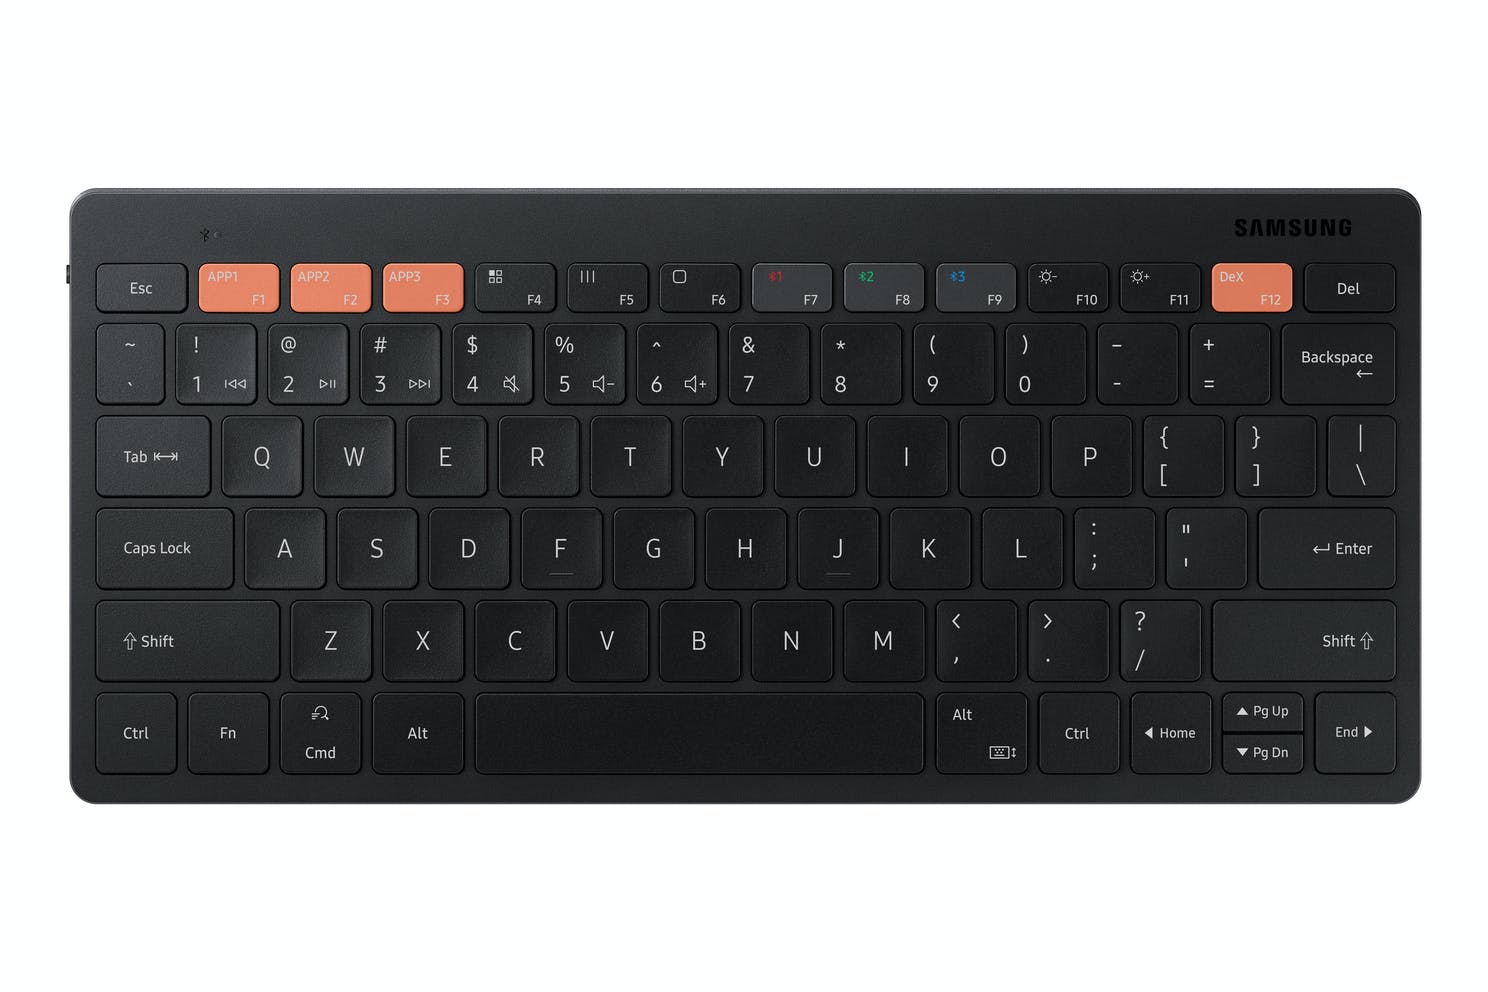 Samsung launches a compact keyboard for 44.99 euros